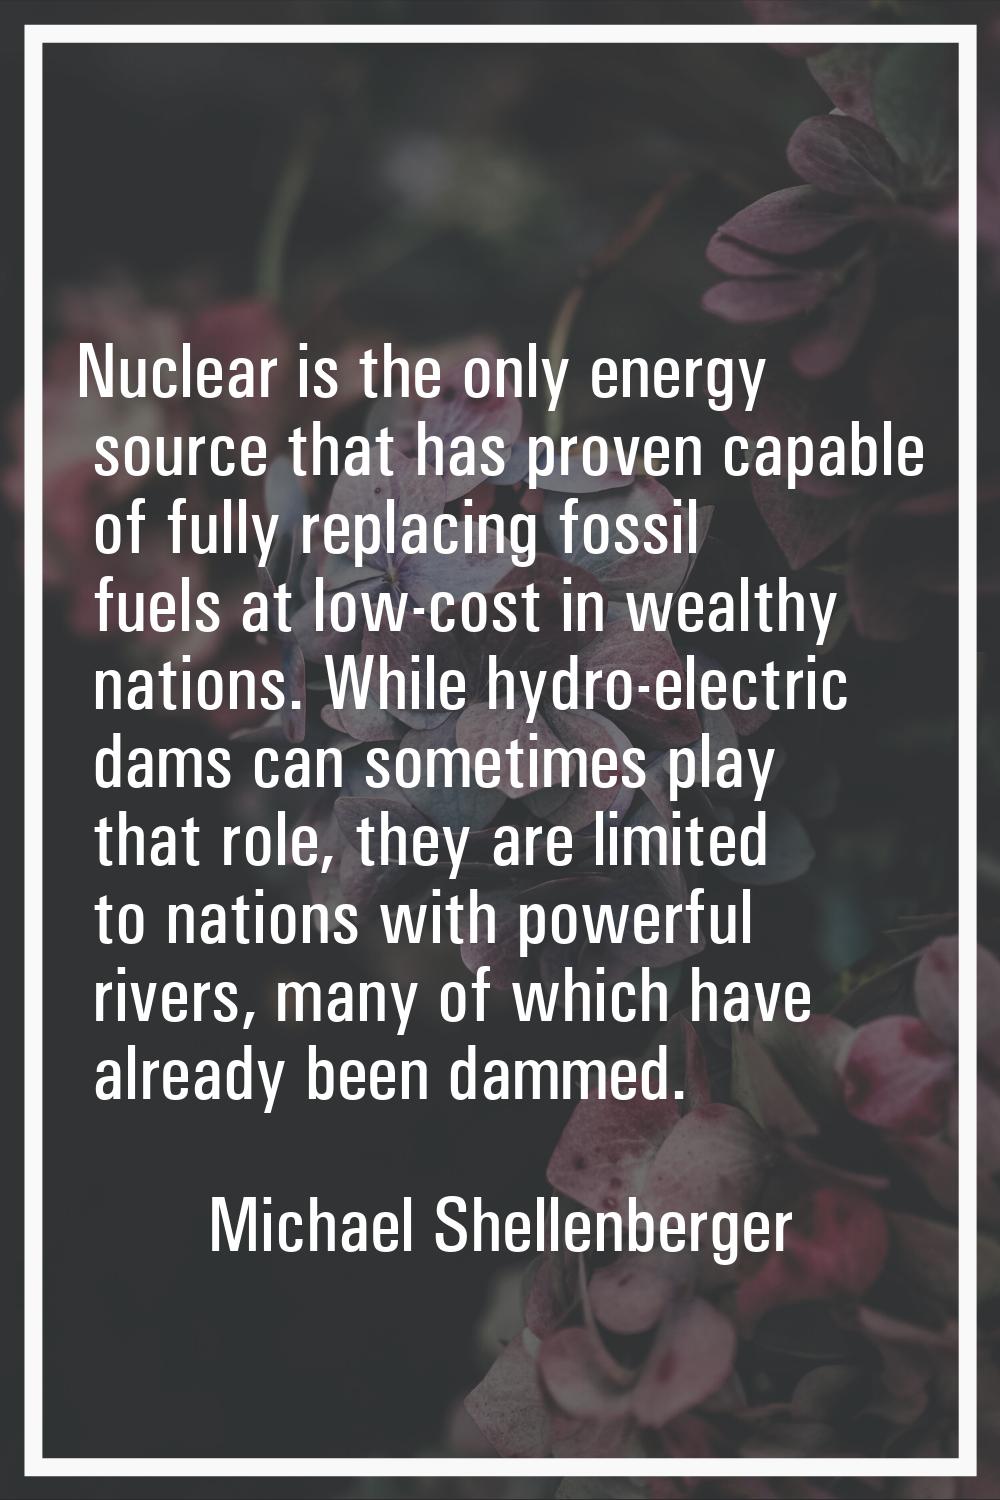 Nuclear is the only energy source that has proven capable of fully replacing fossil fuels at low-co